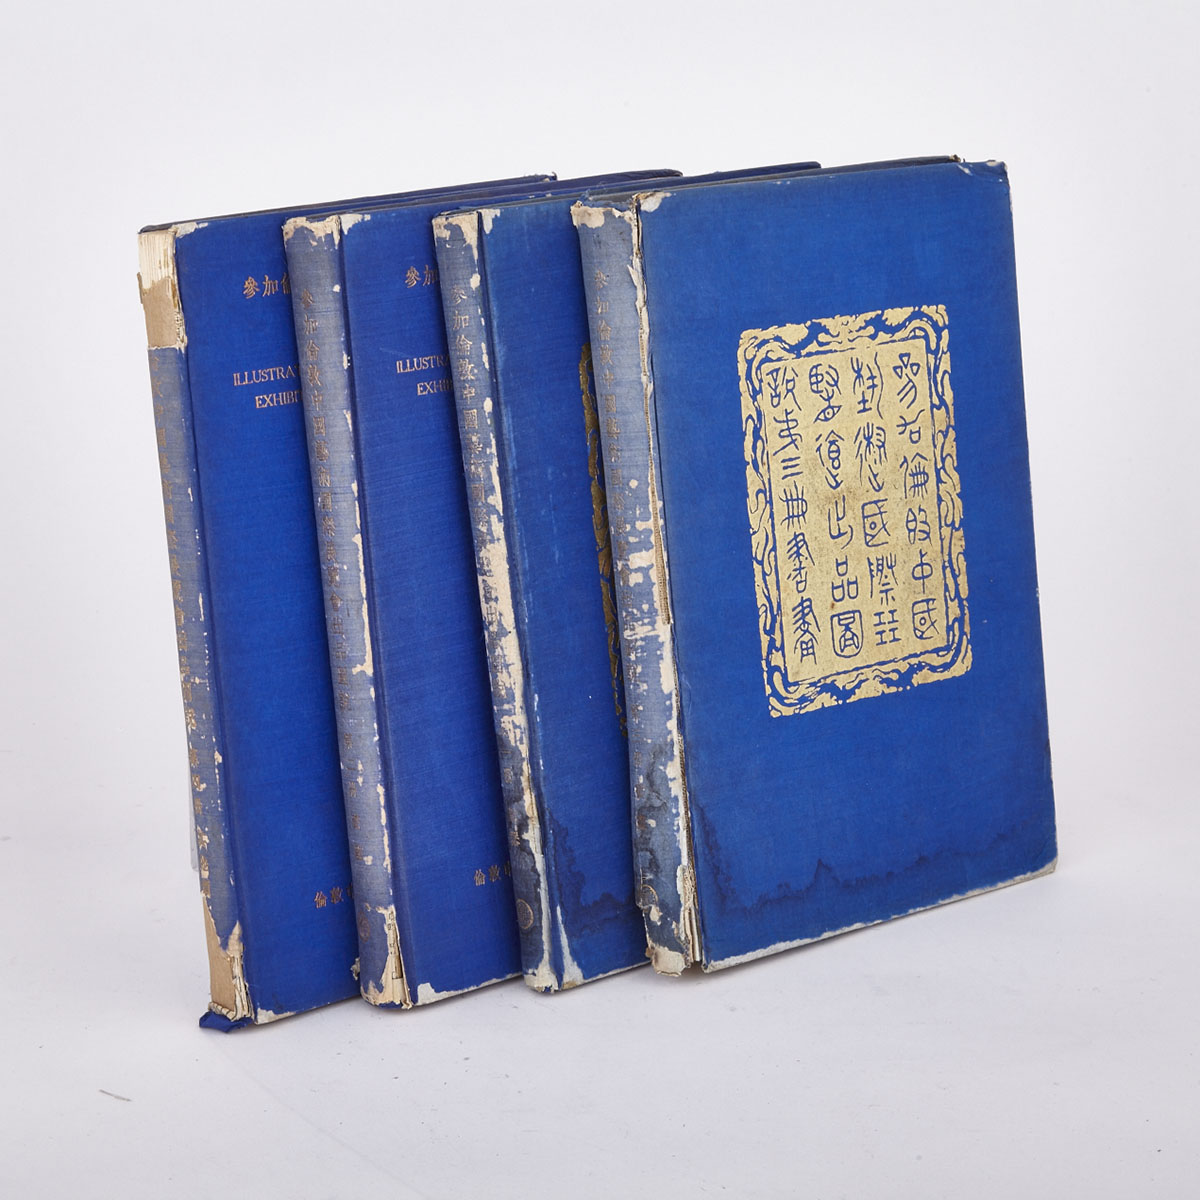 Illustrated Catalogue of Chinese Government Exhibits for the International Exhibition of Chinese Art in London (Four Volumes) 